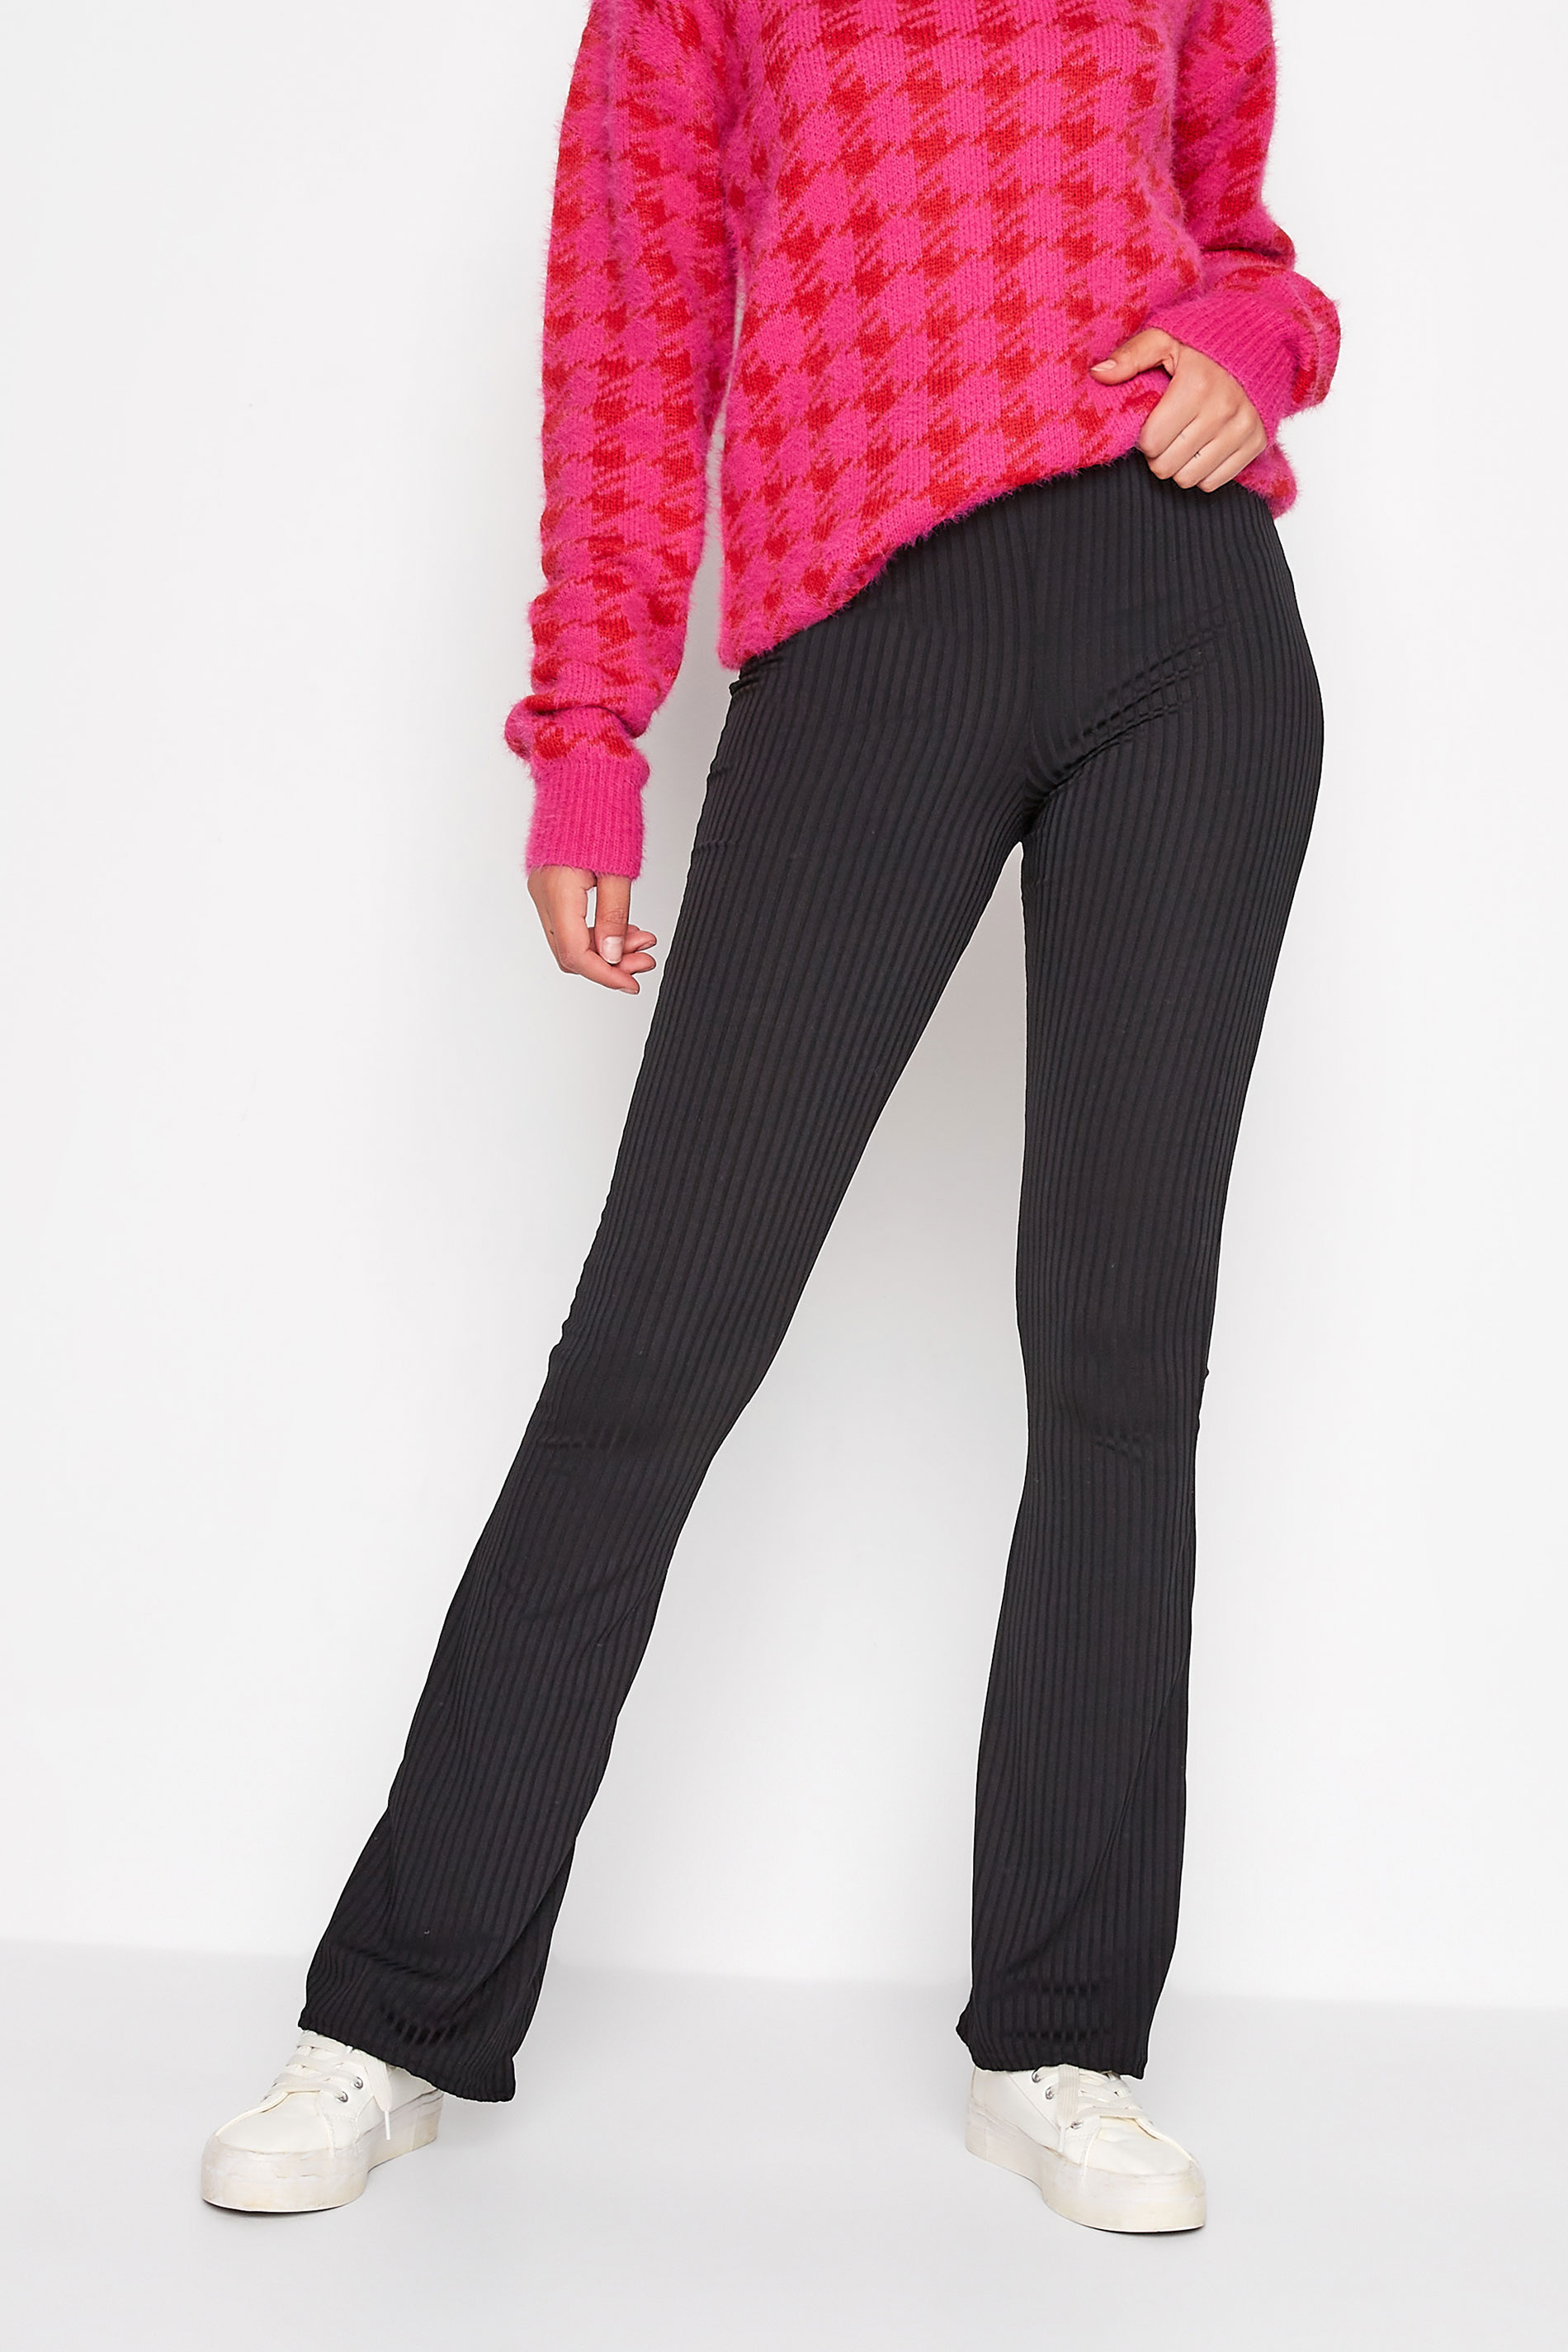 LTS Tall Women's Black Ribbed Flared Trousers | Long Tall Sally 1